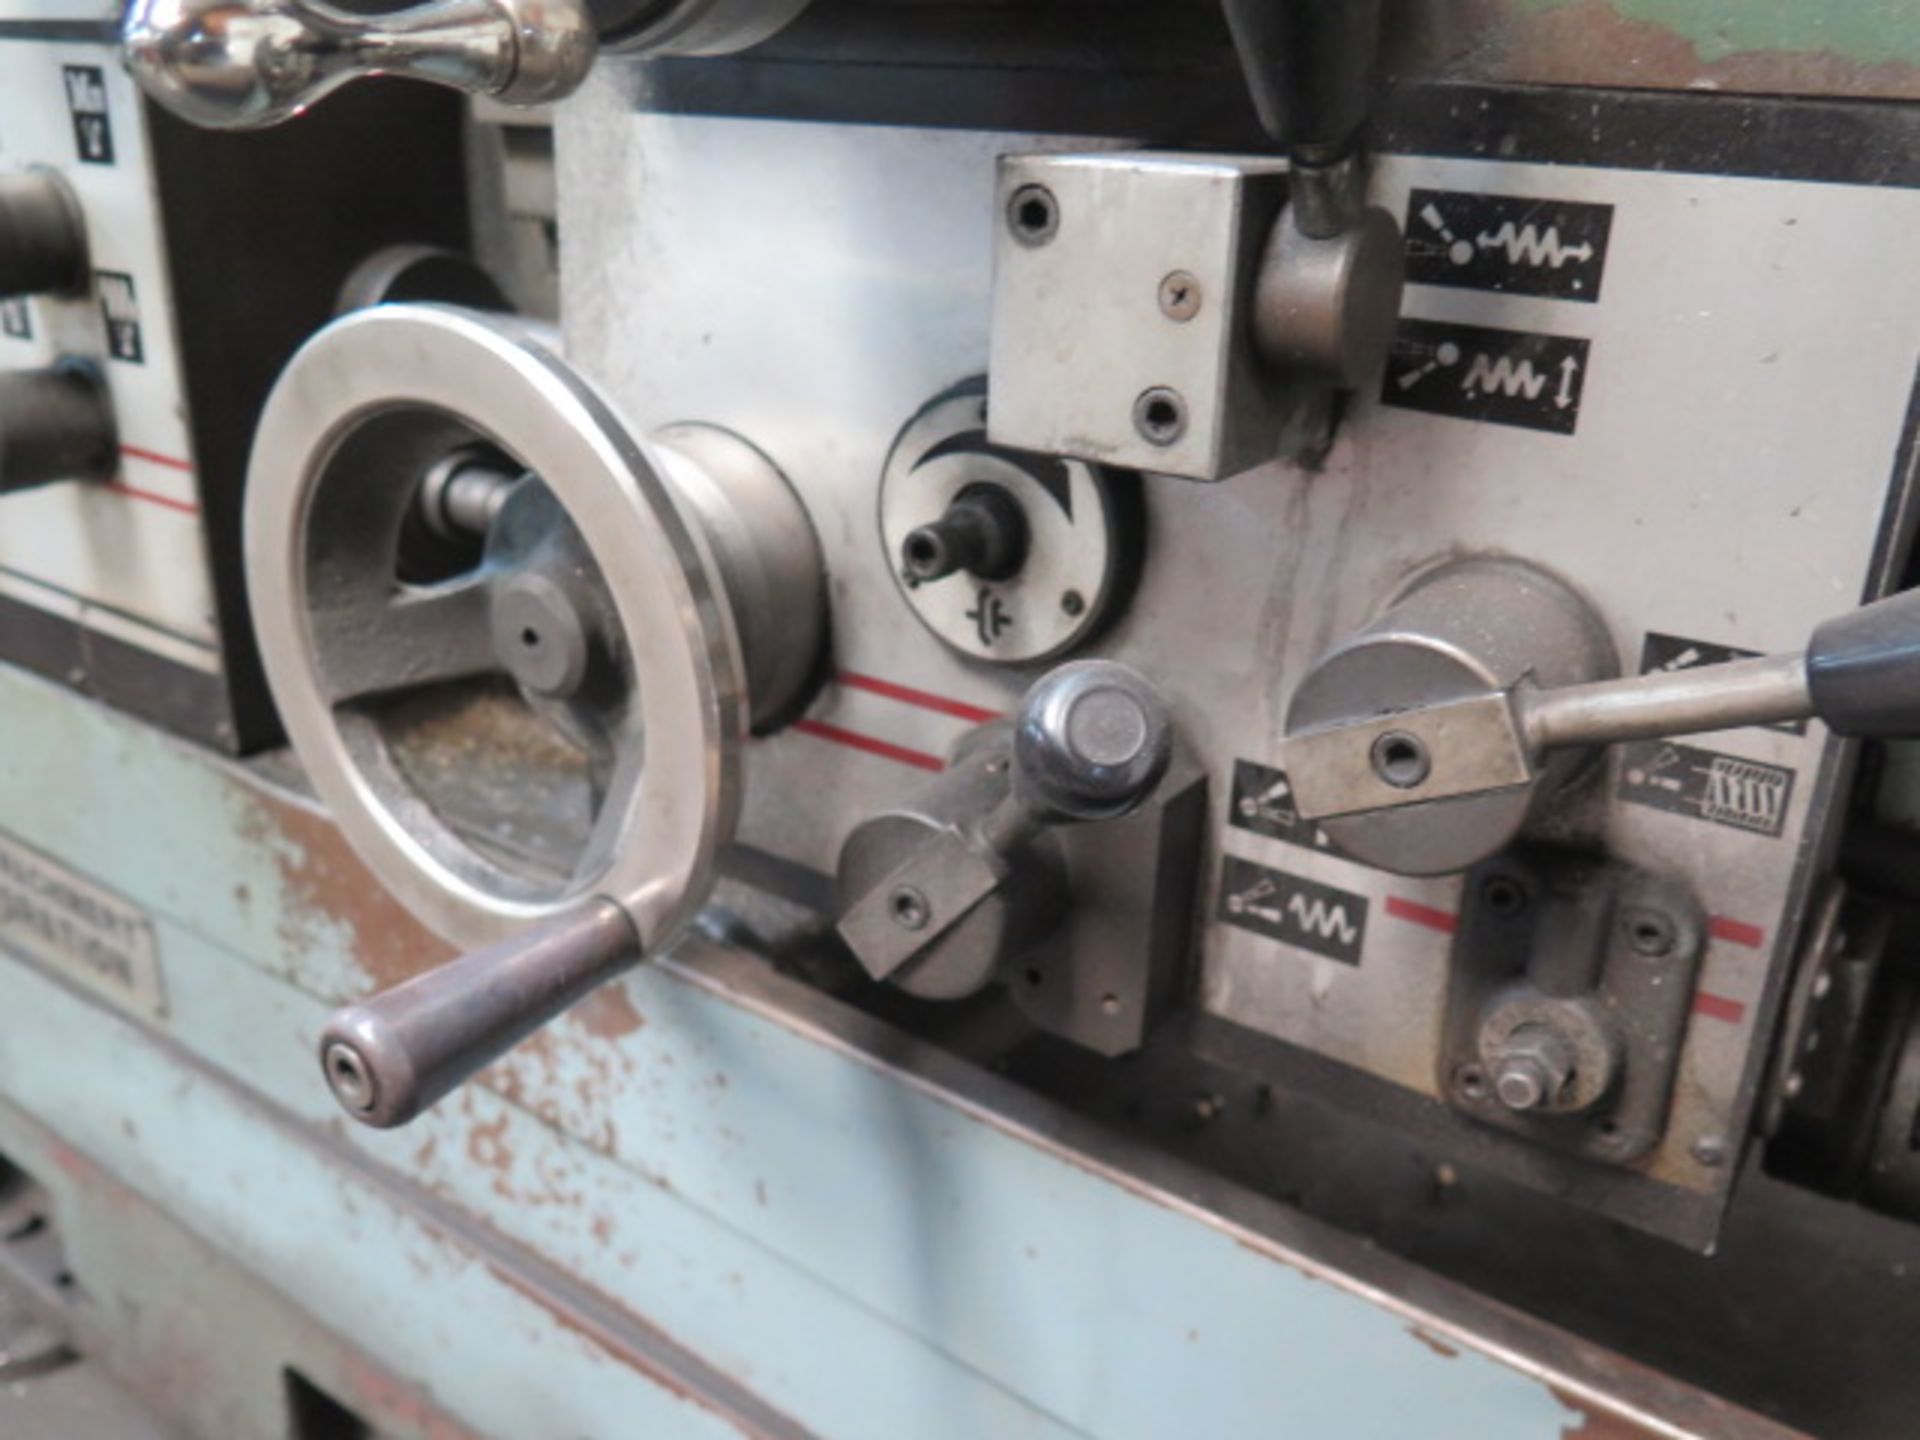 Japan Machinery Corp NL-20X60 20” x 60” Gap Bed Lathe w/Inch/mm Threading, Tailstock, SOLD AS IS - Image 12 of 20